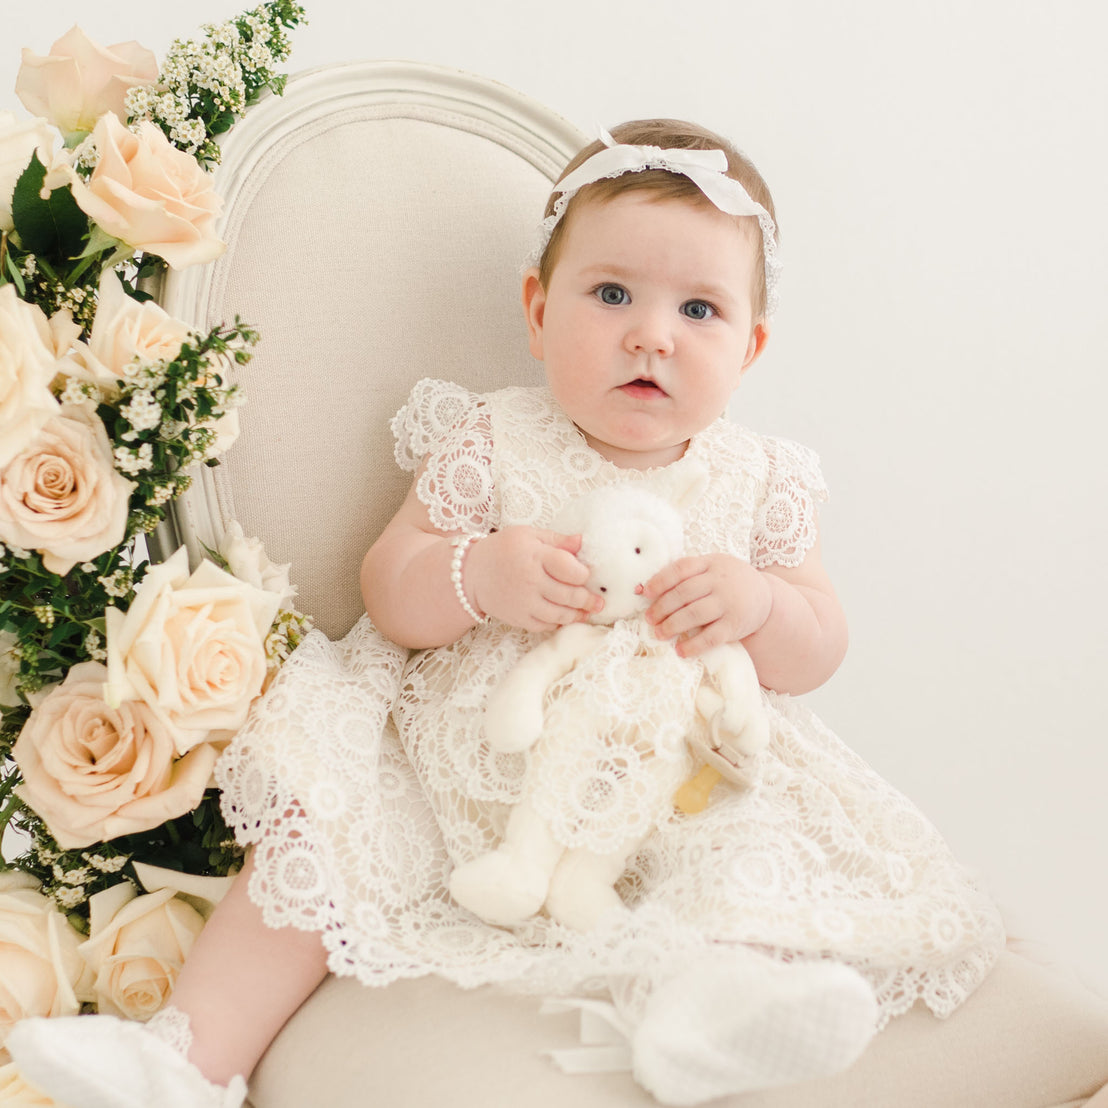 Baby girl sitting in chair holding a soft toy bear. Wearing the Poppy fancy baby dress.